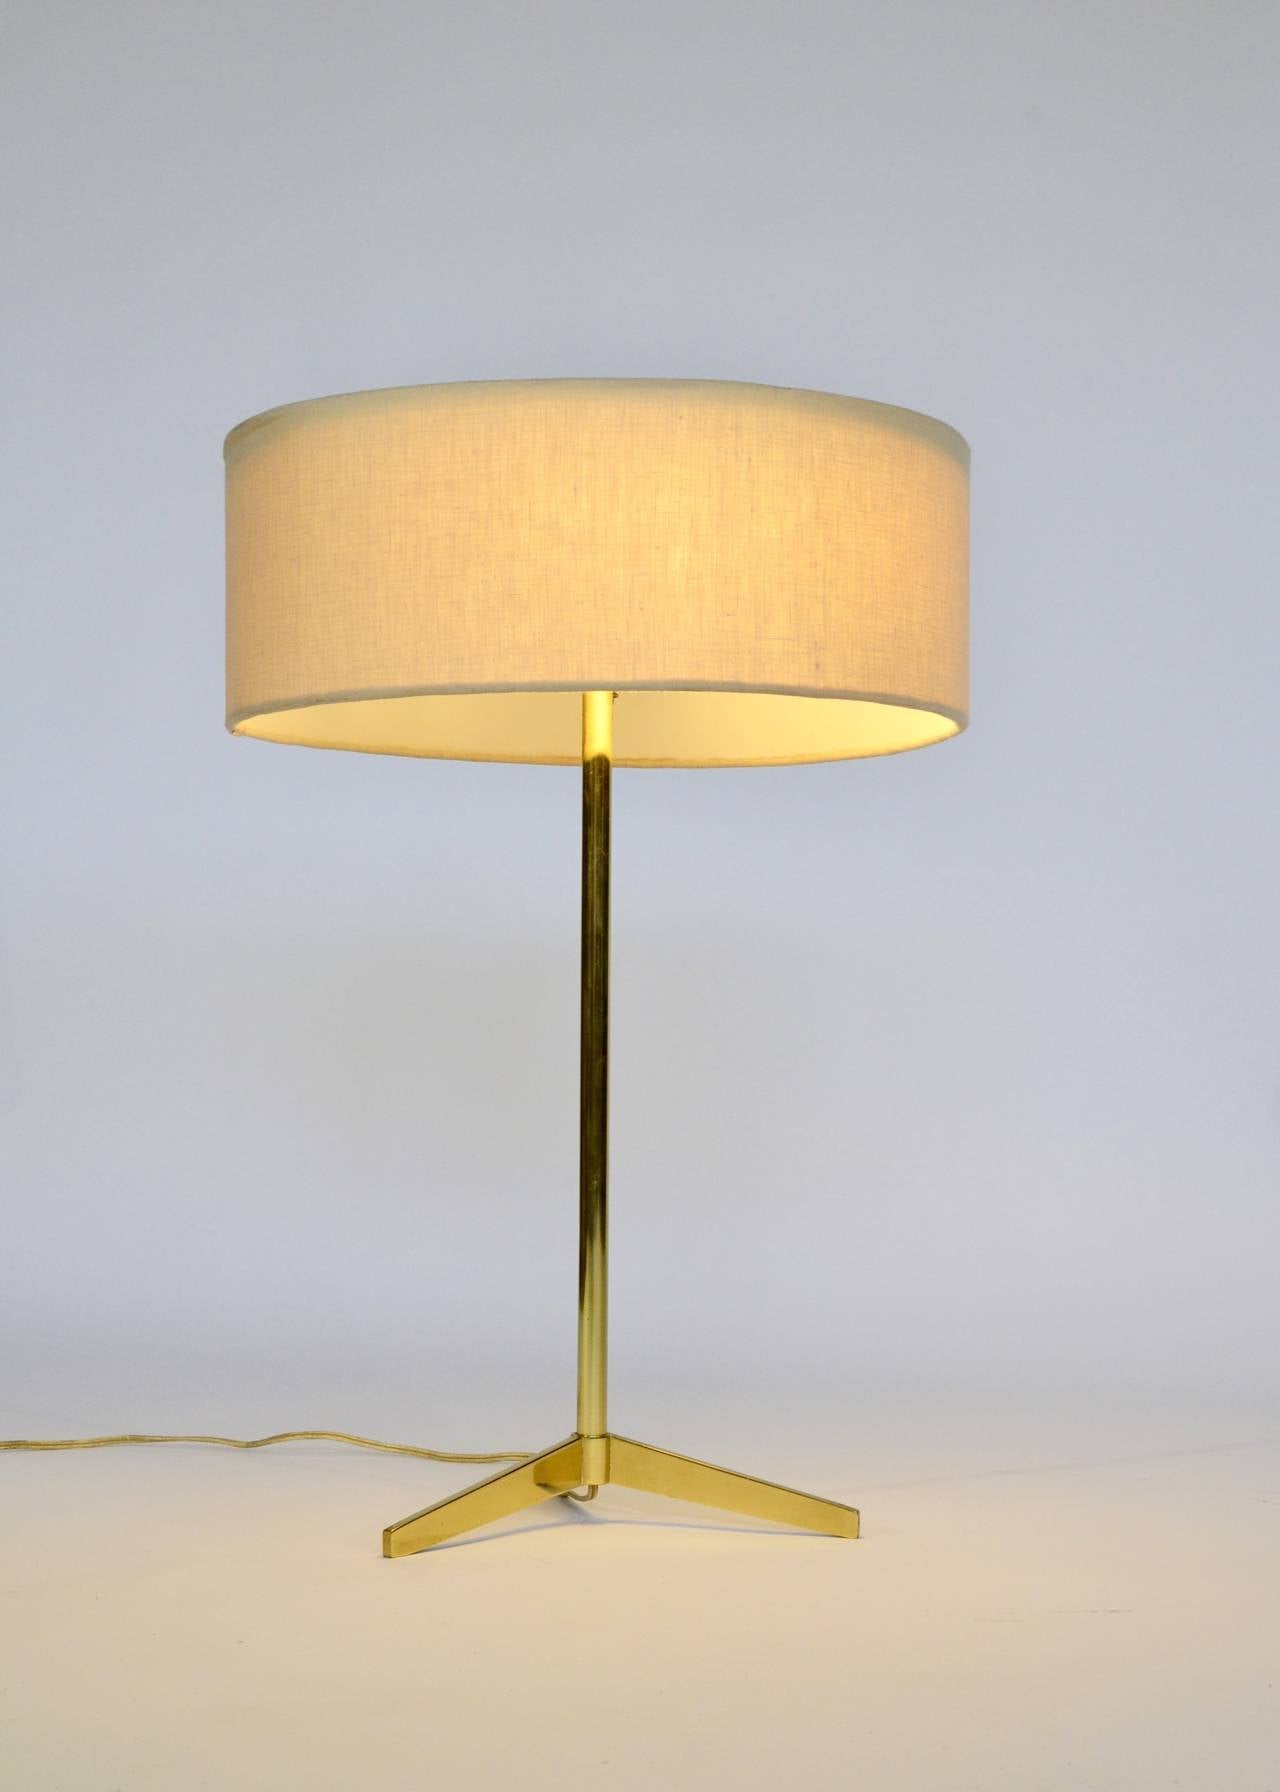 Classic brass tripod table lamp by Paul McCobb. Simple and elegant iconic form.

Please feel free to contact Polished Modern directly for best pricing and shipping options.